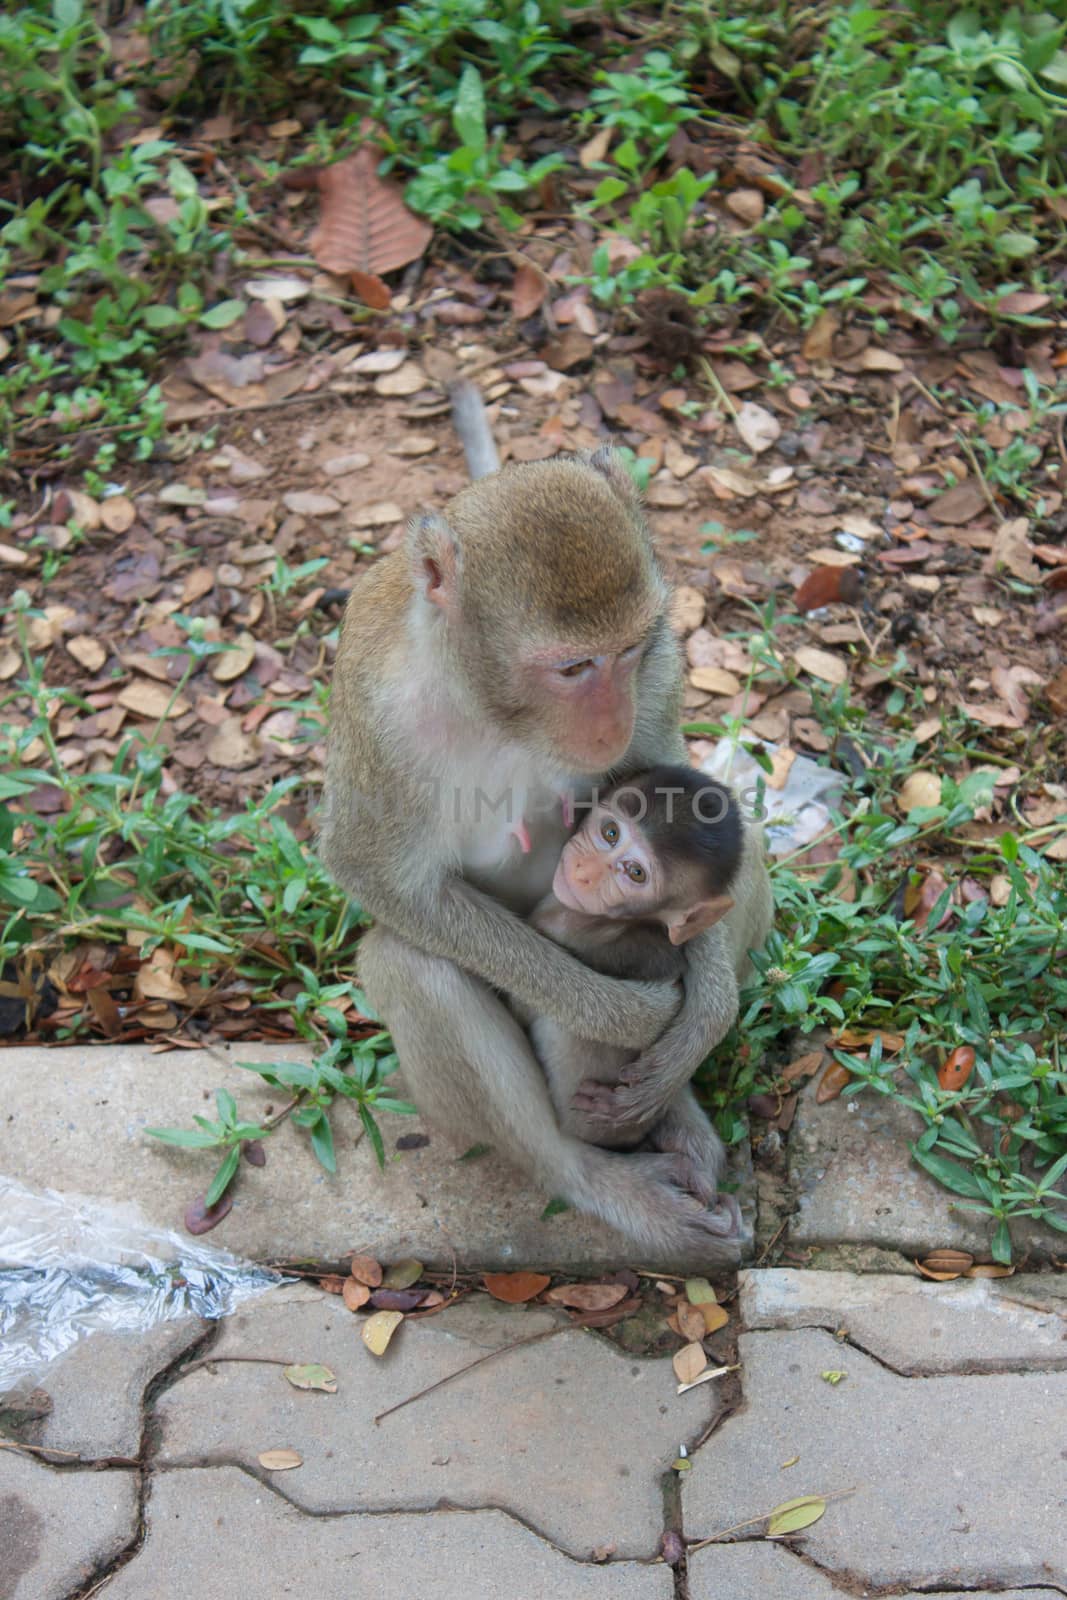 mother monkey
Embracing a small child